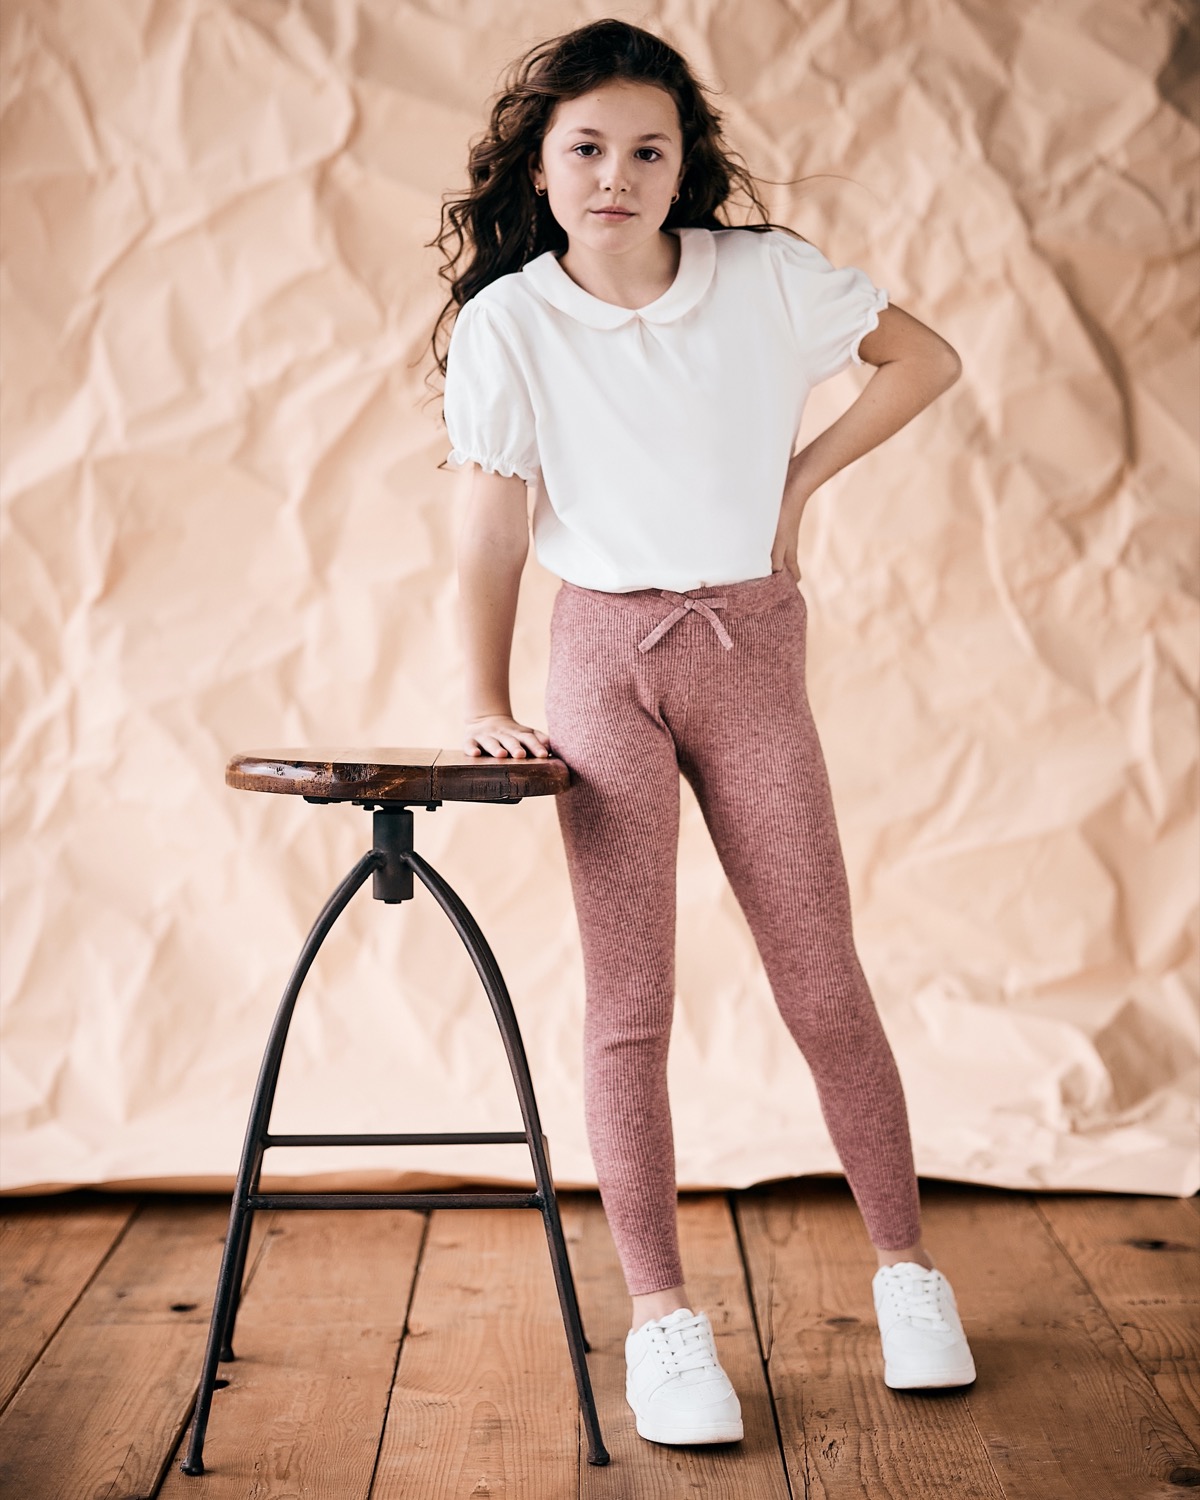 https://dunnes.btxmedia.com/pws/client/images/catalogue/products/5011326/zoom/5011326_pink.jpg